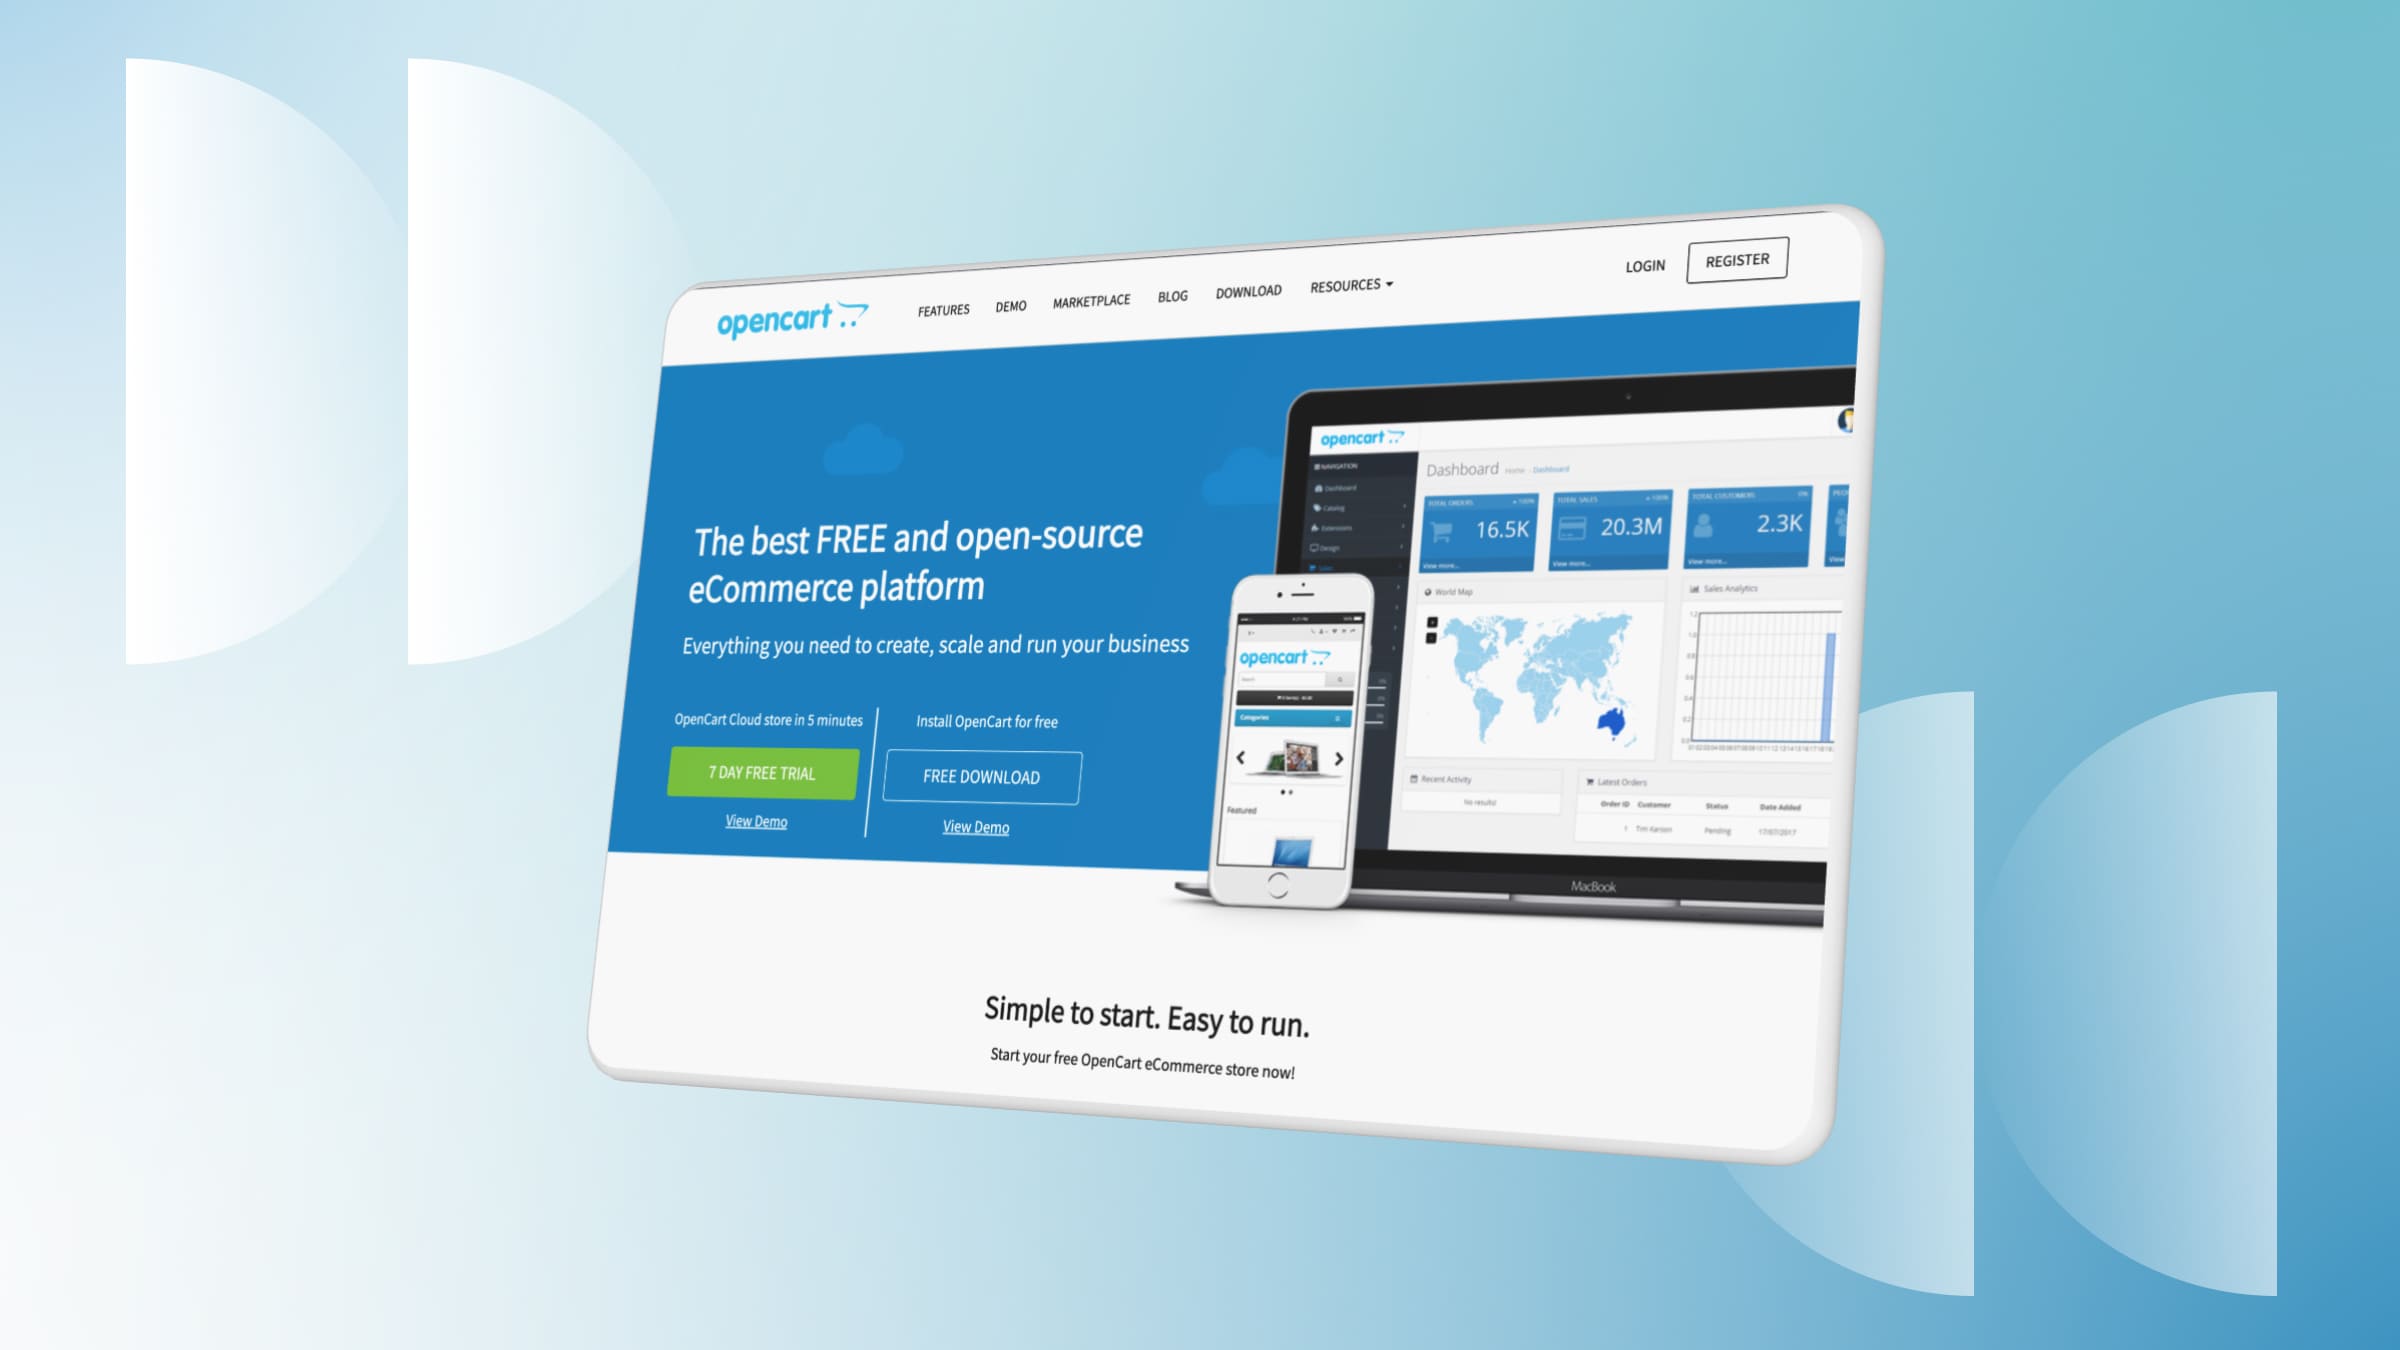 OpenCart is an open source CMS with an extensive library of themes and modules for website creation.